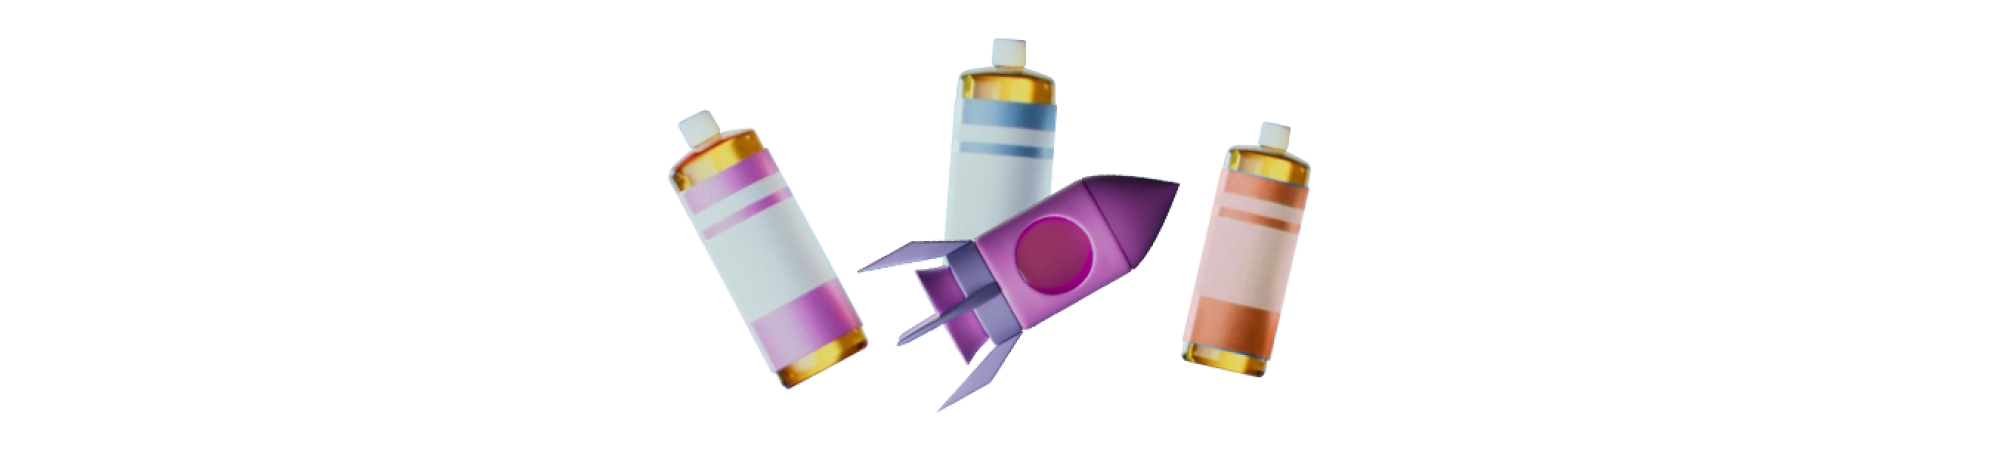 An illustration of three soap bottles and a purple rocket ship.